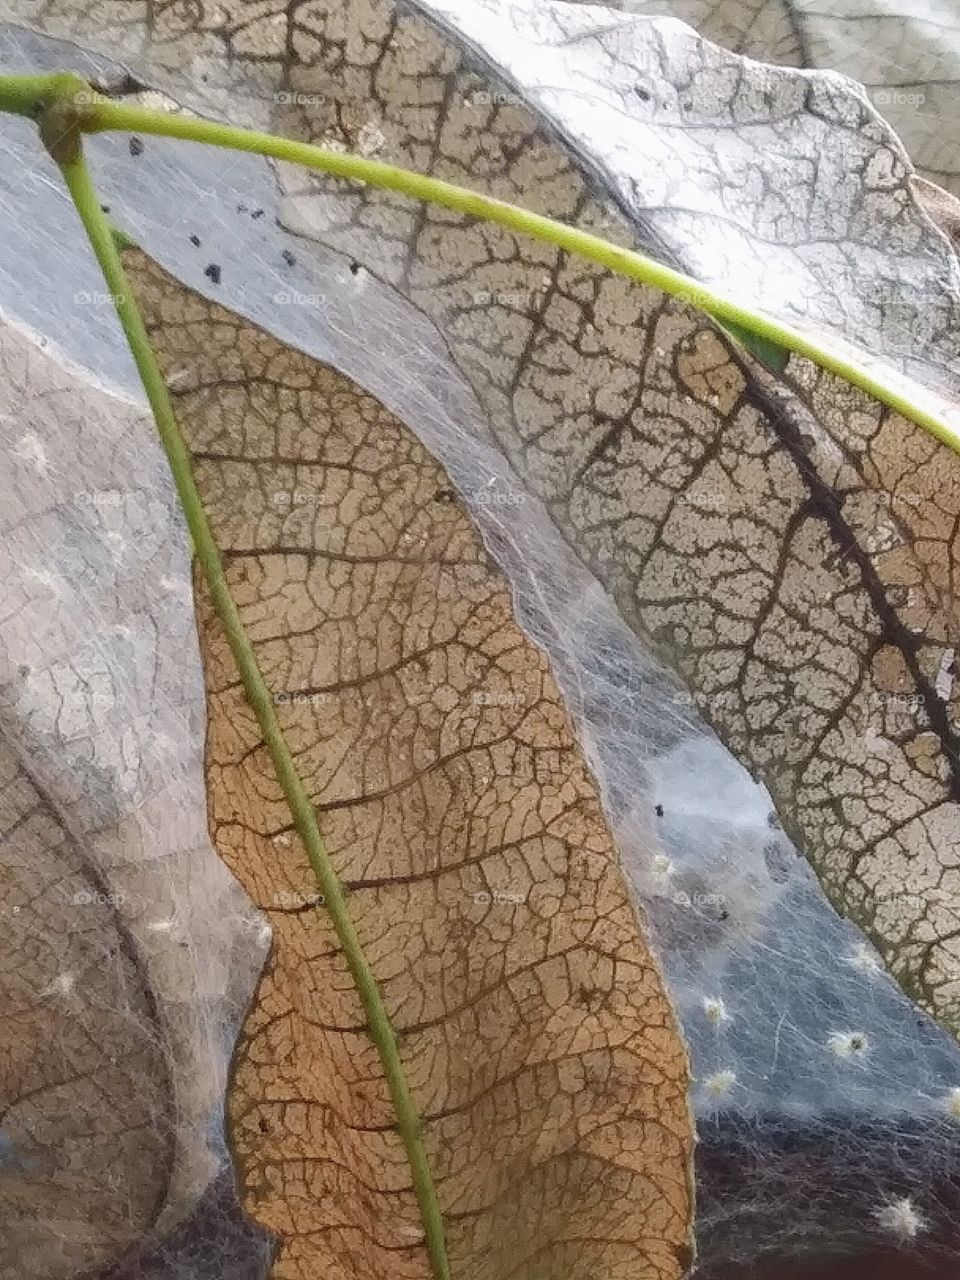 insect damage to pecan leaves